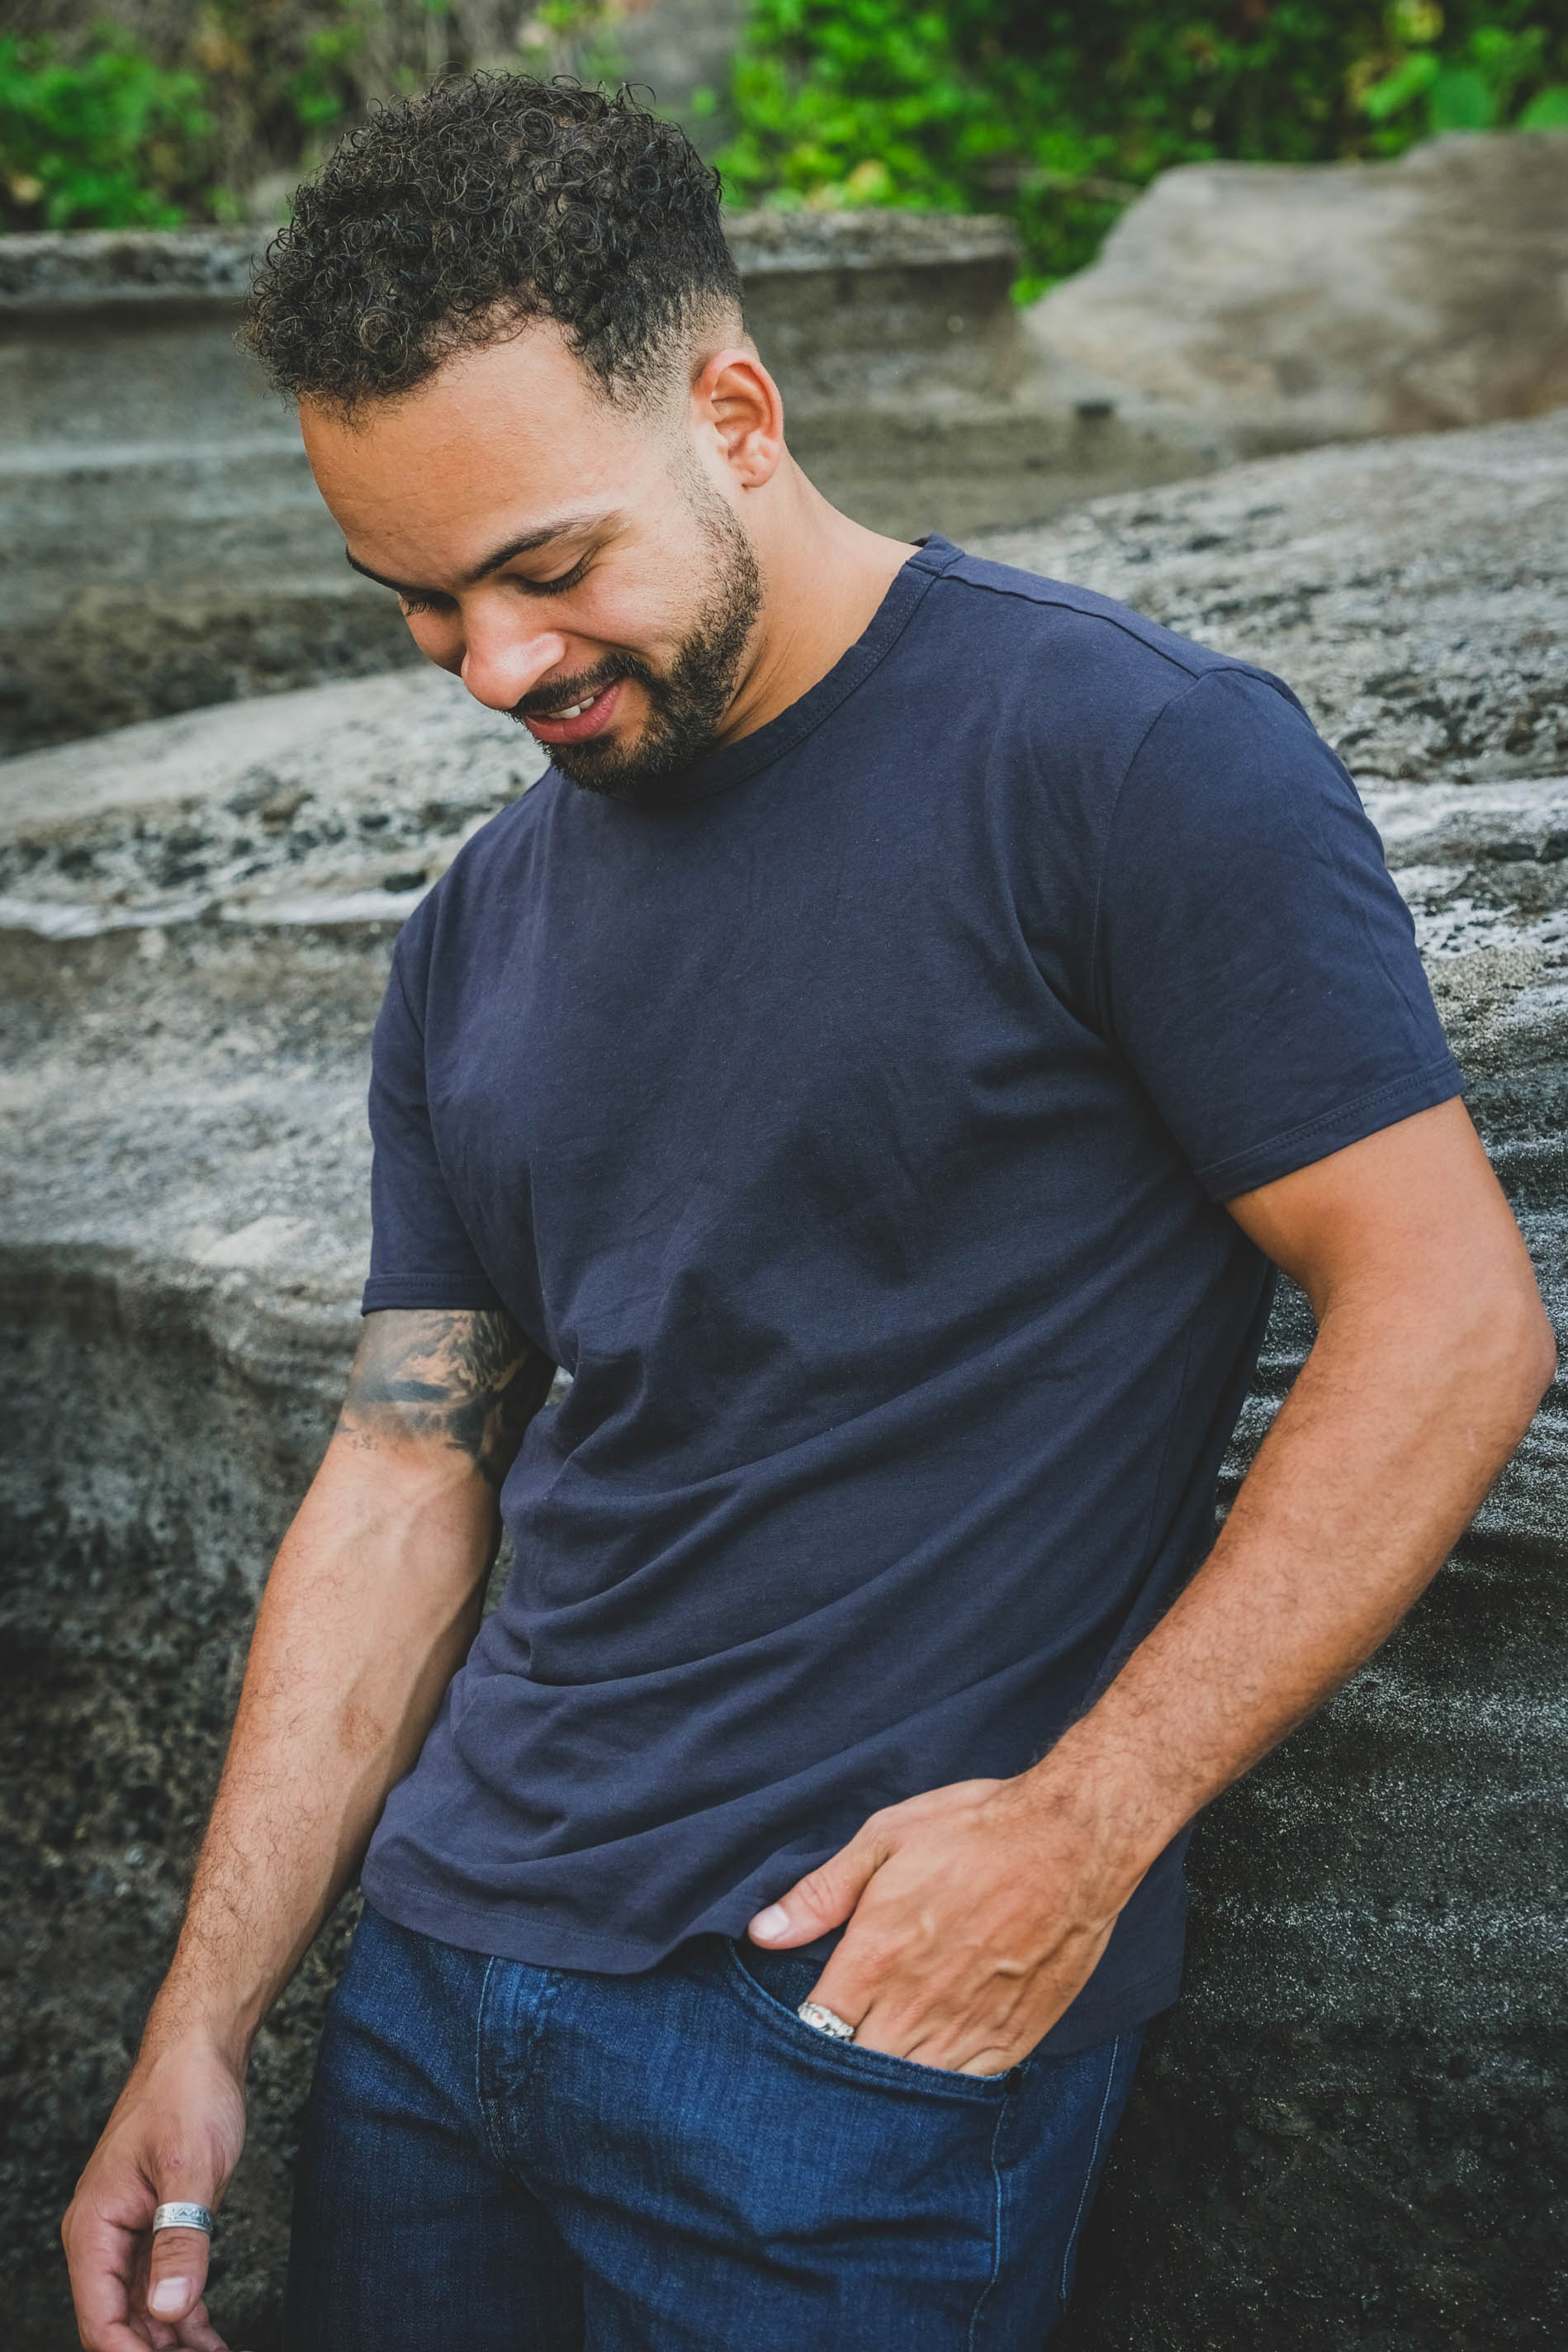 Man in a navy blue t-shirt and dark blue jeans smiling and looking down while standing by a rocky background.